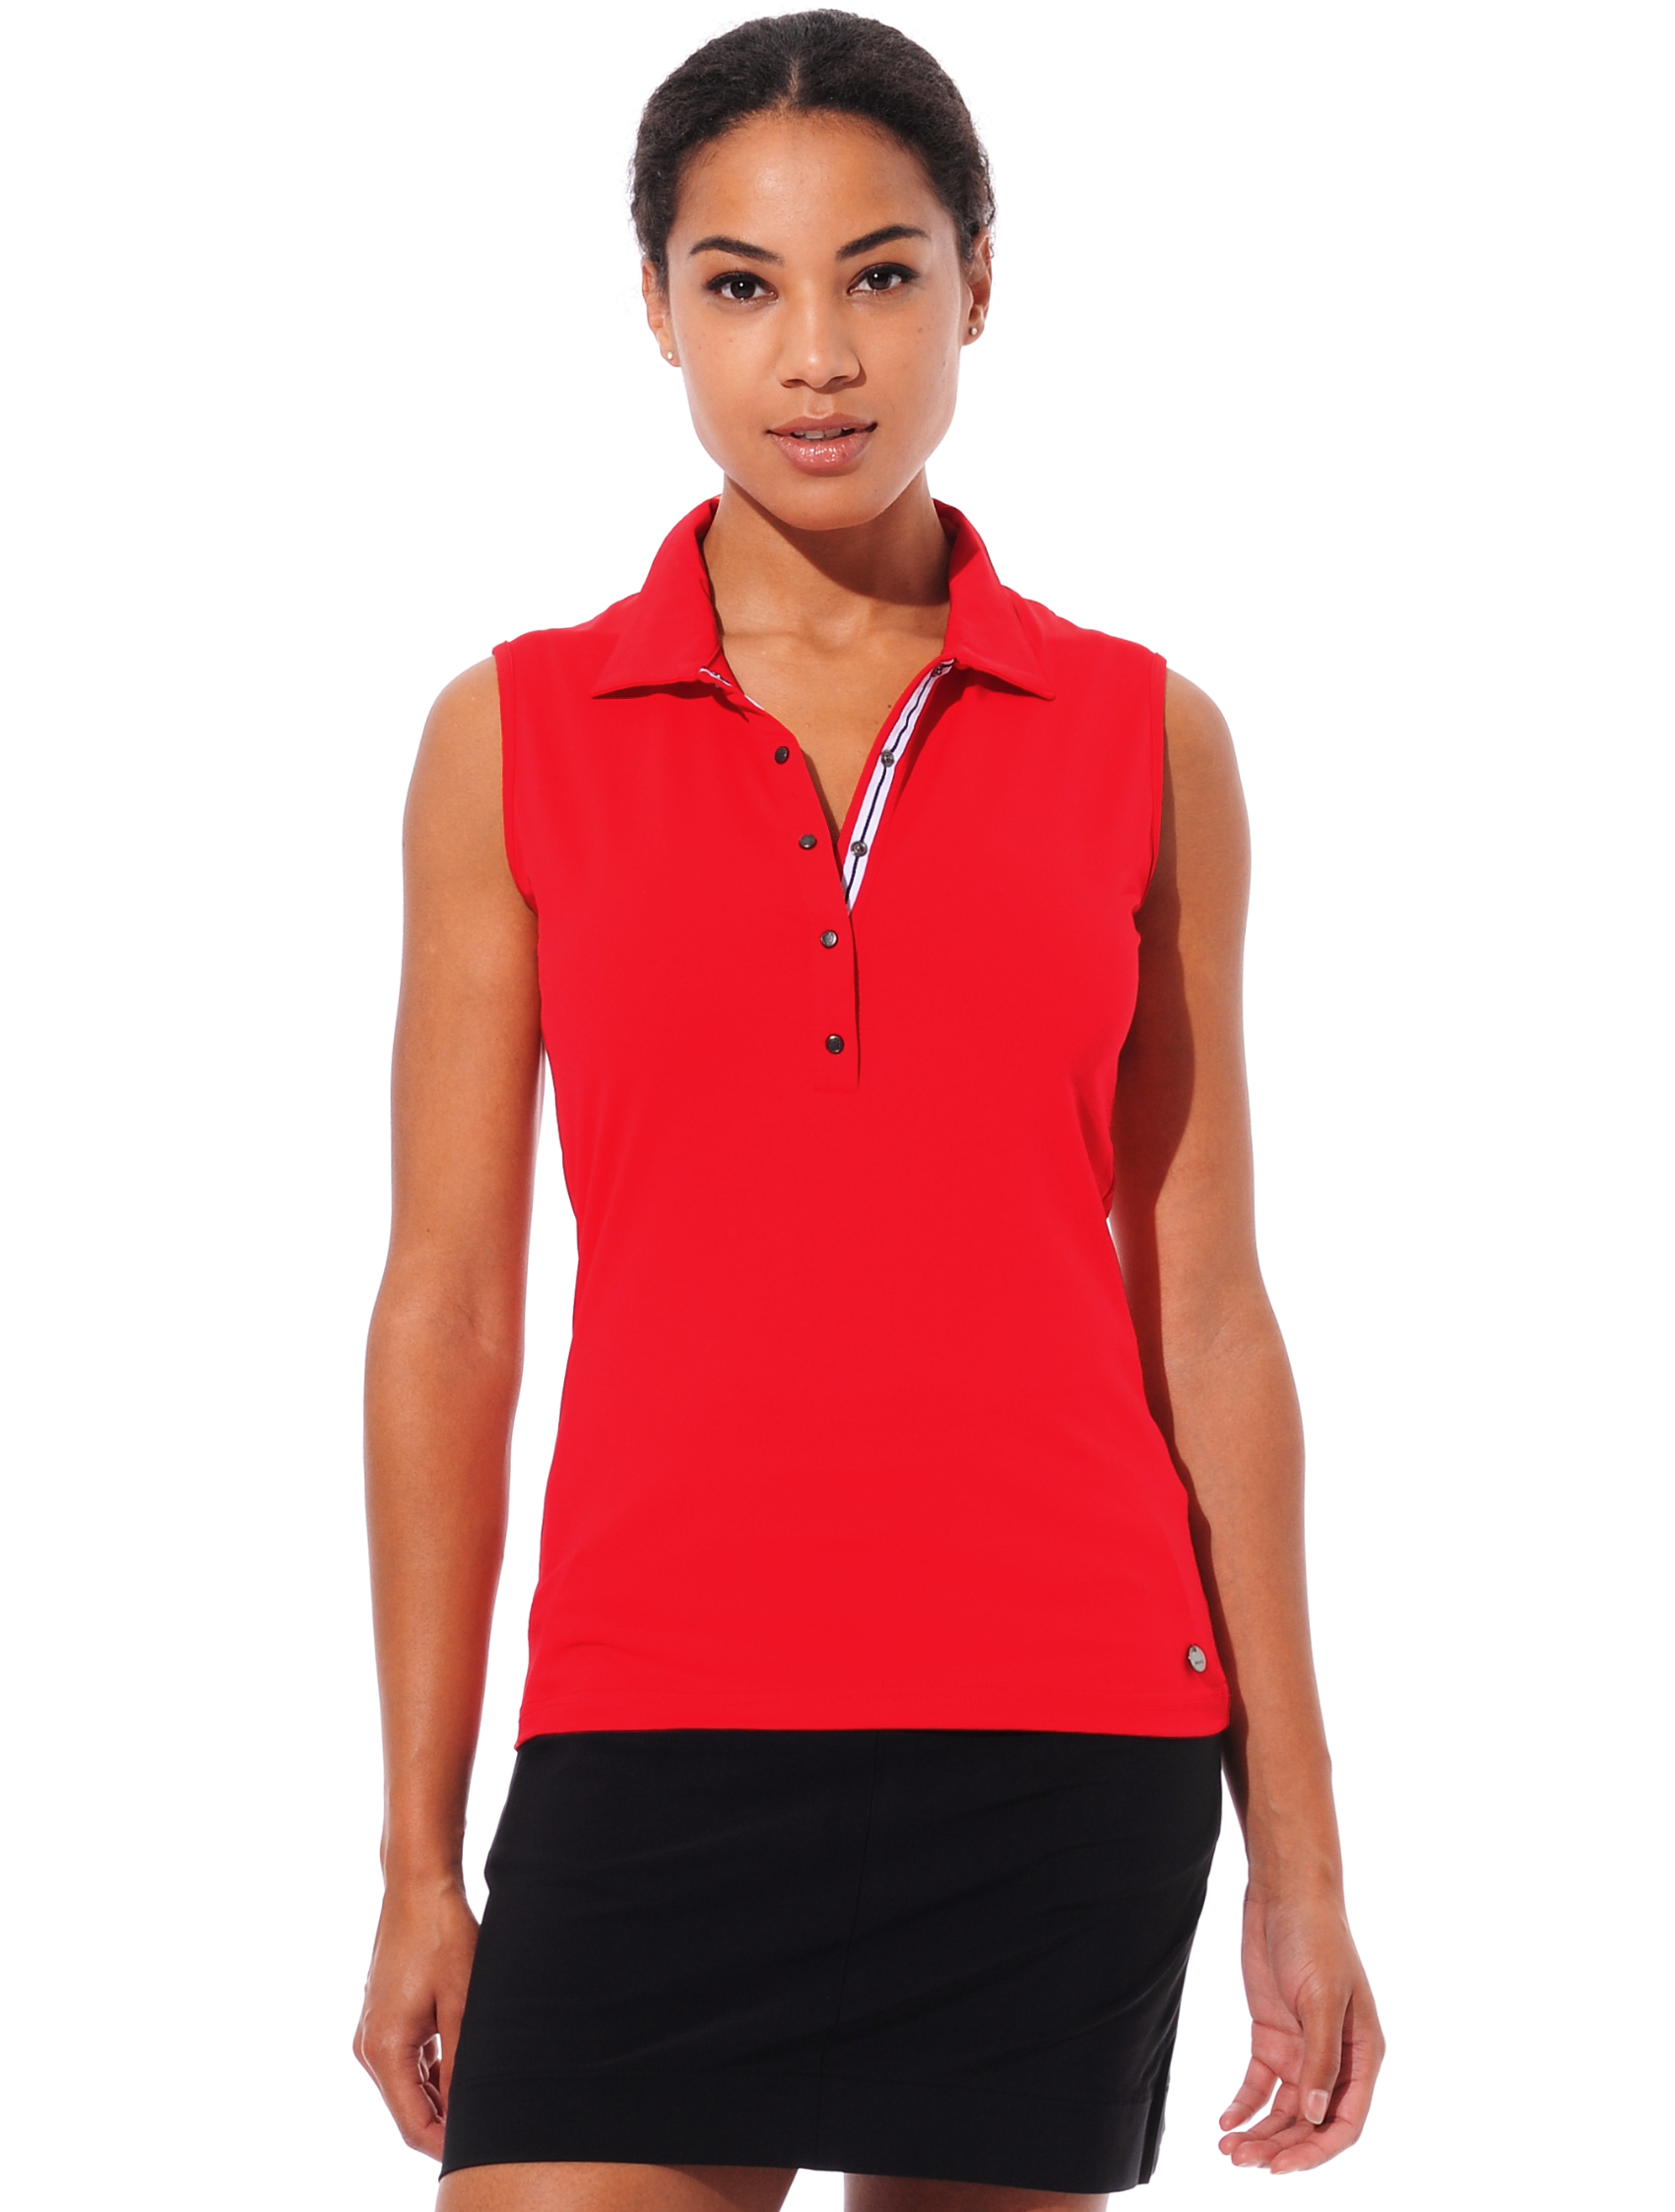 Jersey golf polo shirt red 